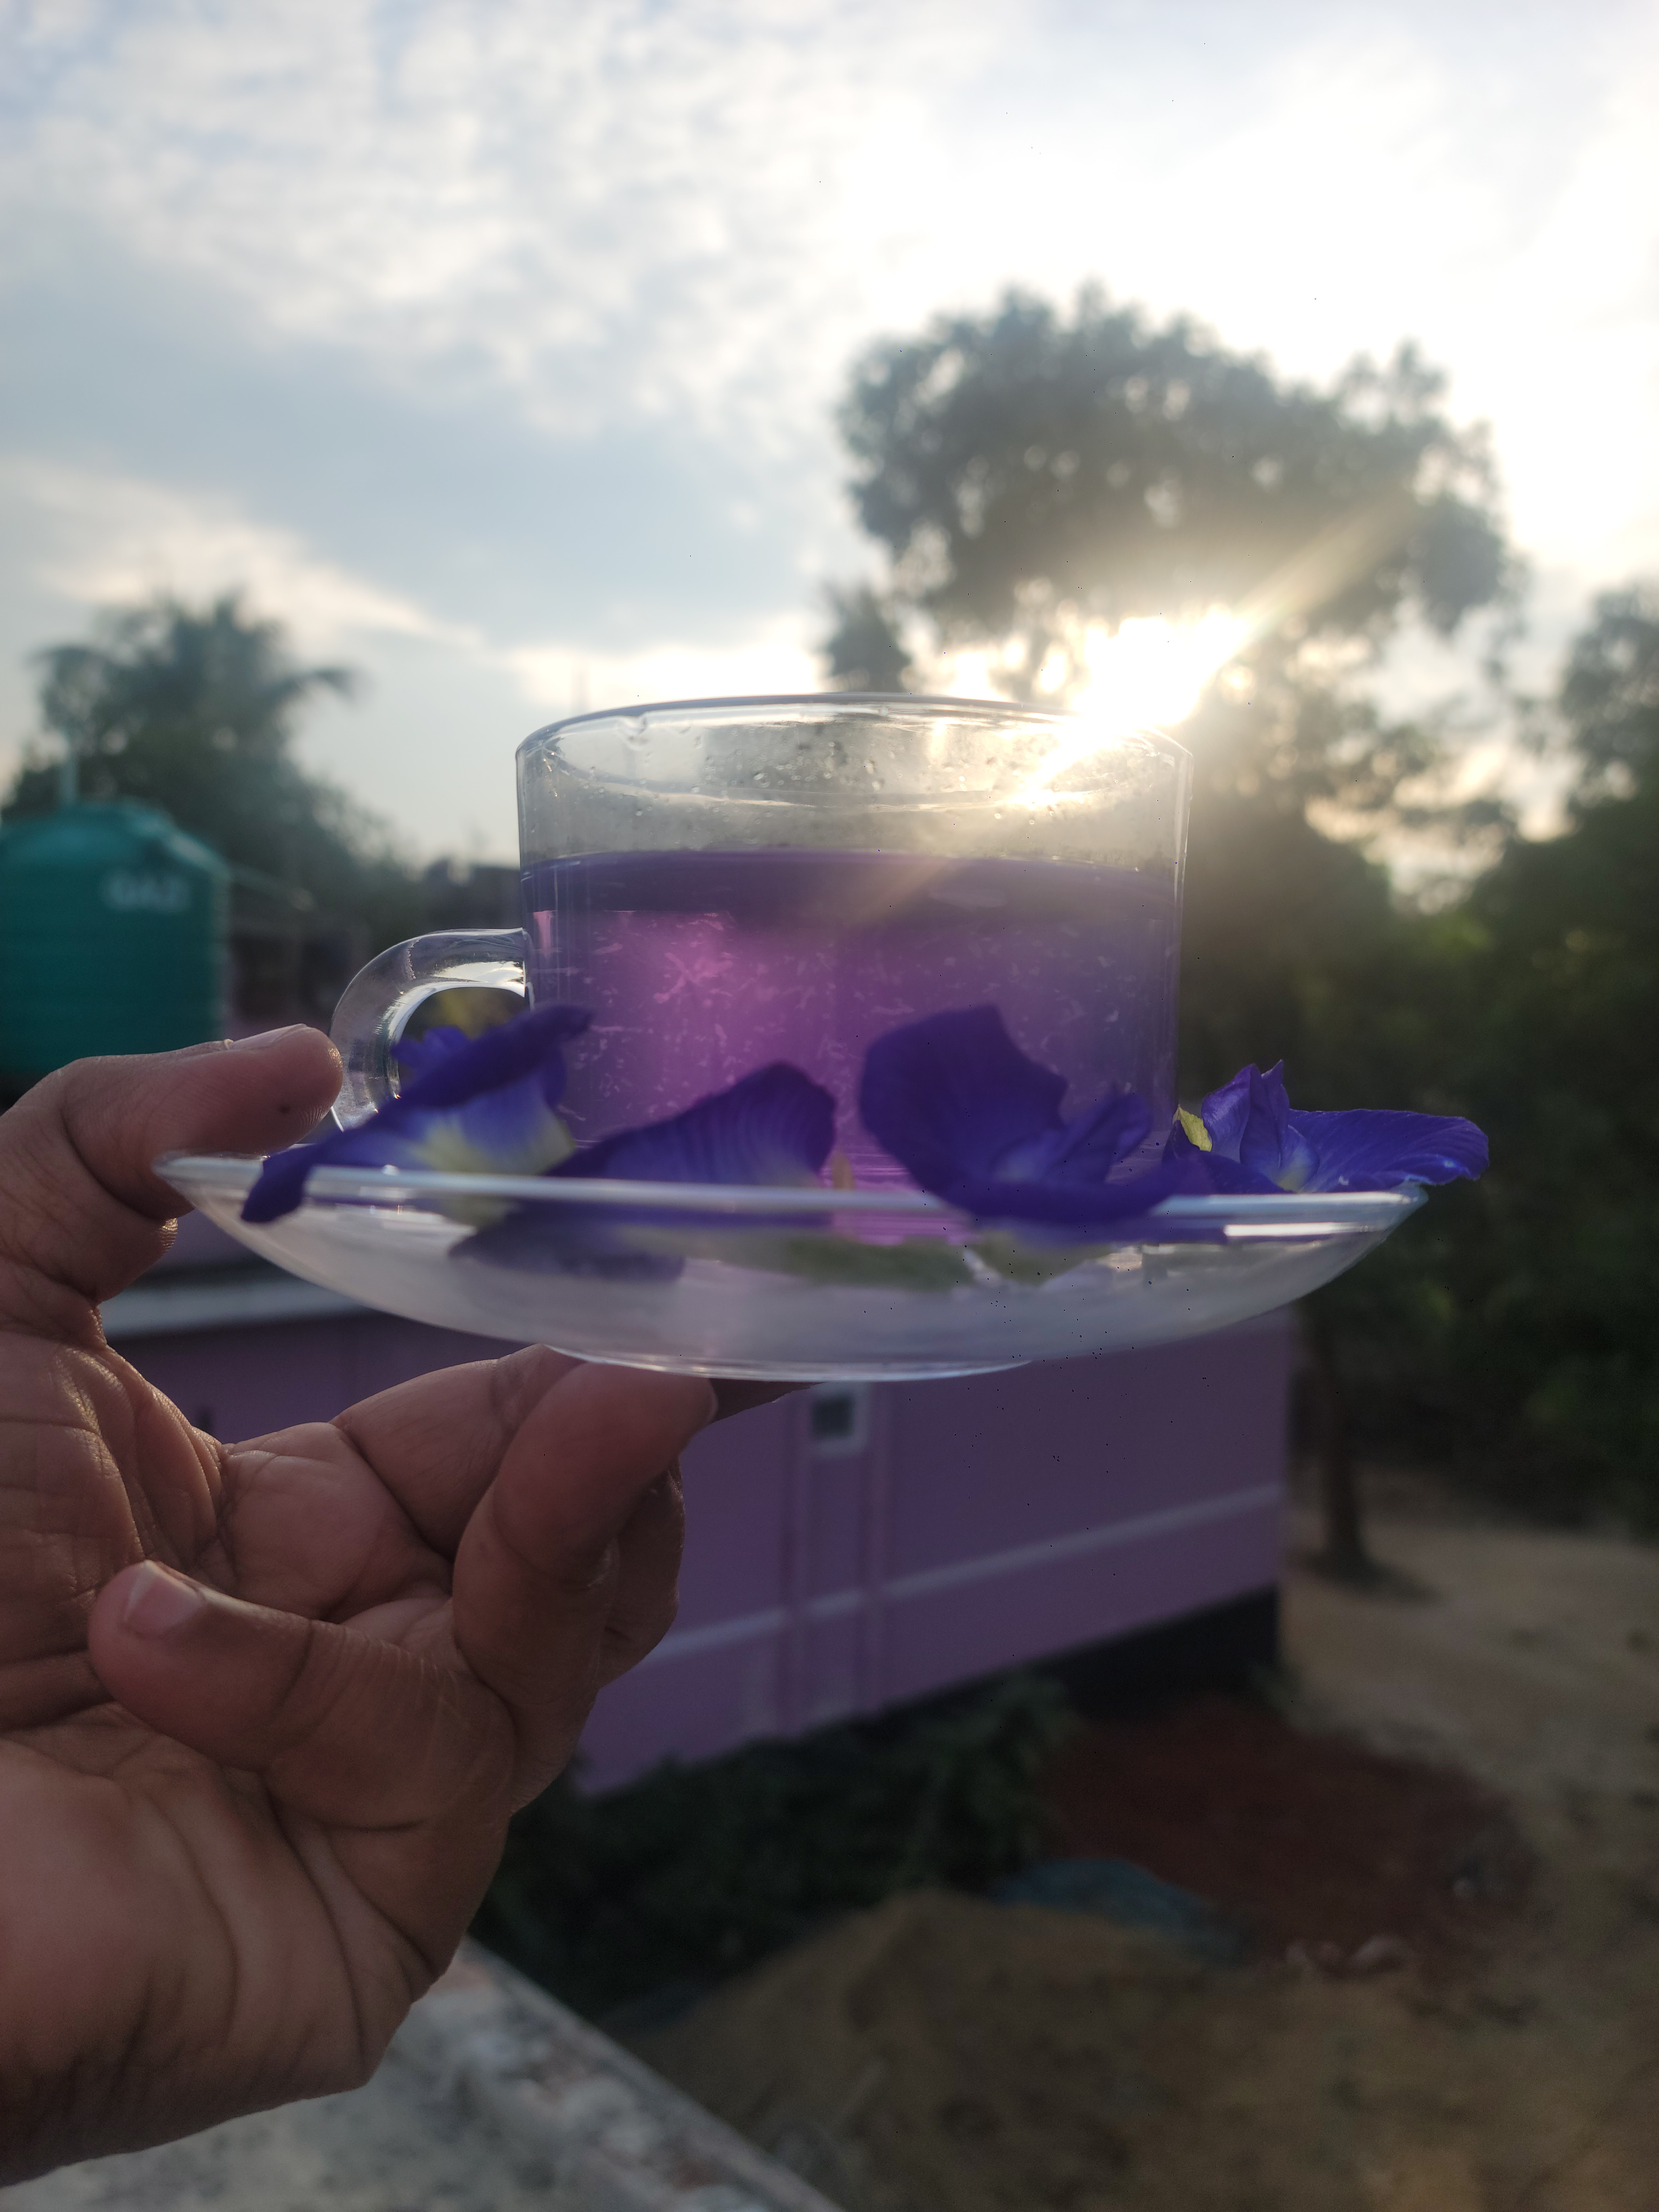 he aparajita flower, often referred to as the "butterfly pea," is traditionally used in Ayurvedic medicine as a nootropic—a substance that can enhance cognitive function.  It is believed that the flower has the ability to enhance memory and learning, possibly by affecting neurotransmitters in the brain.